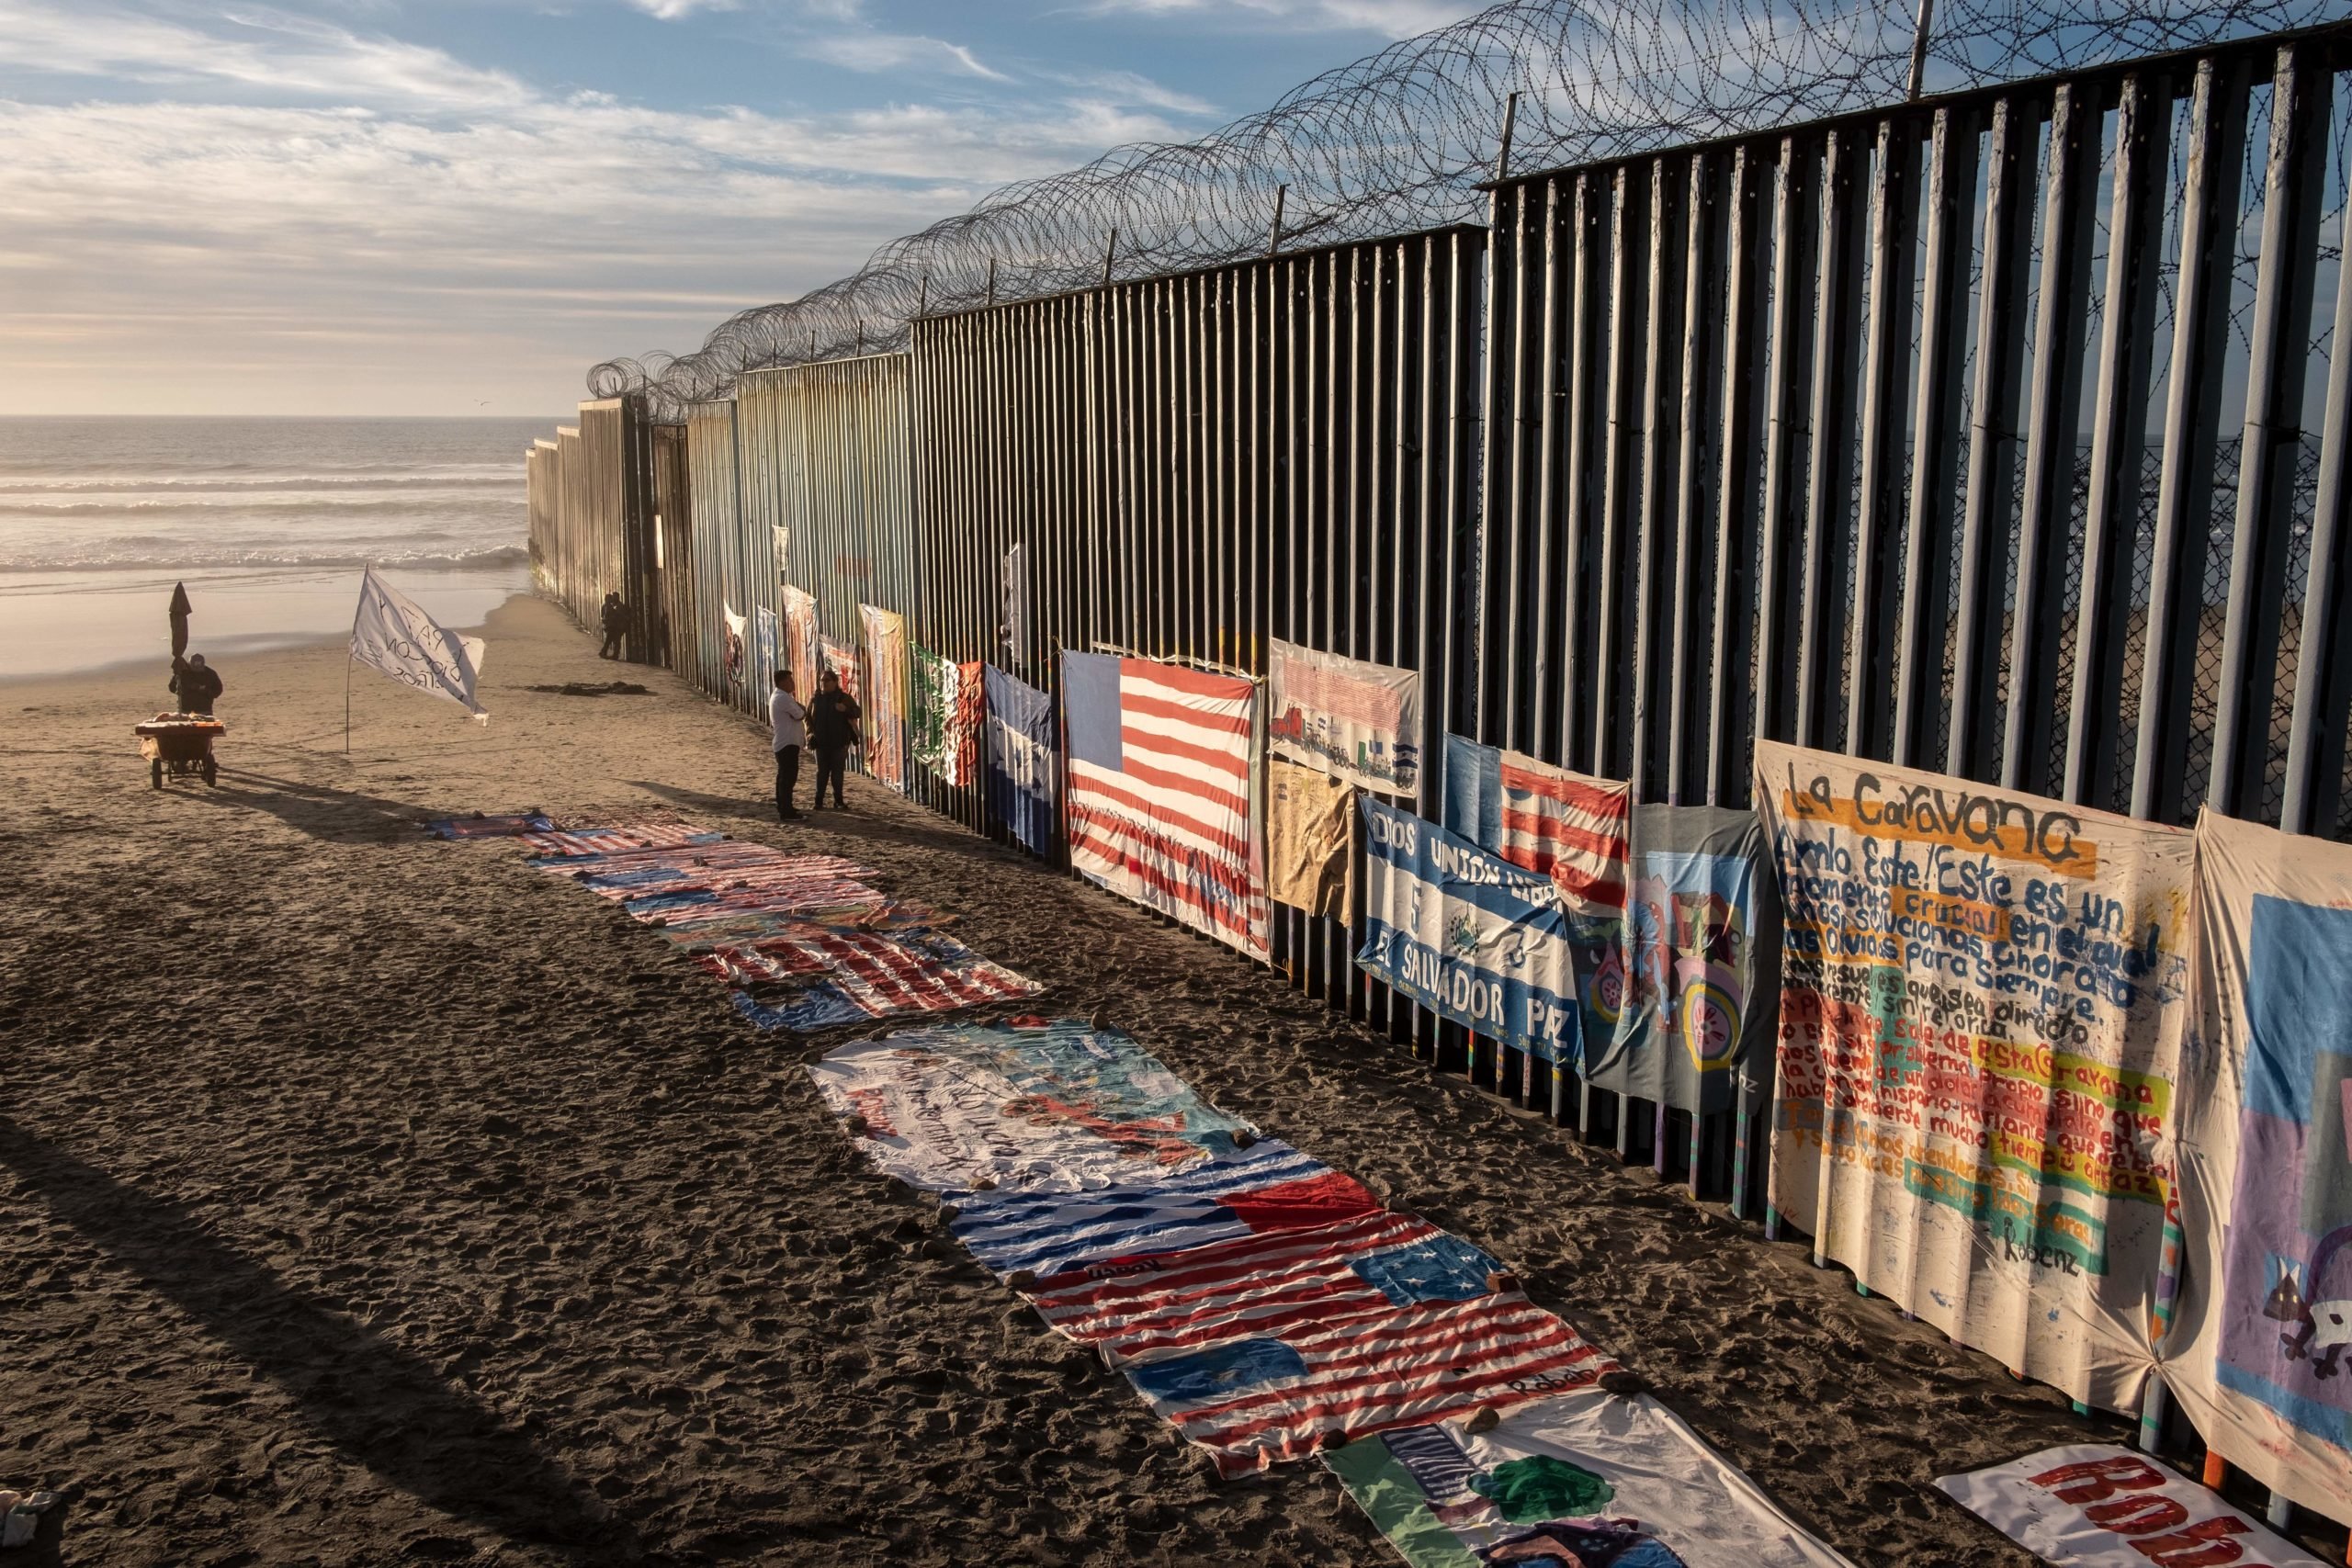 A section of the US-Mexico border fence is seen on Jan. 8, 2019. (Guillermo Arias/AFP via Getty Images)